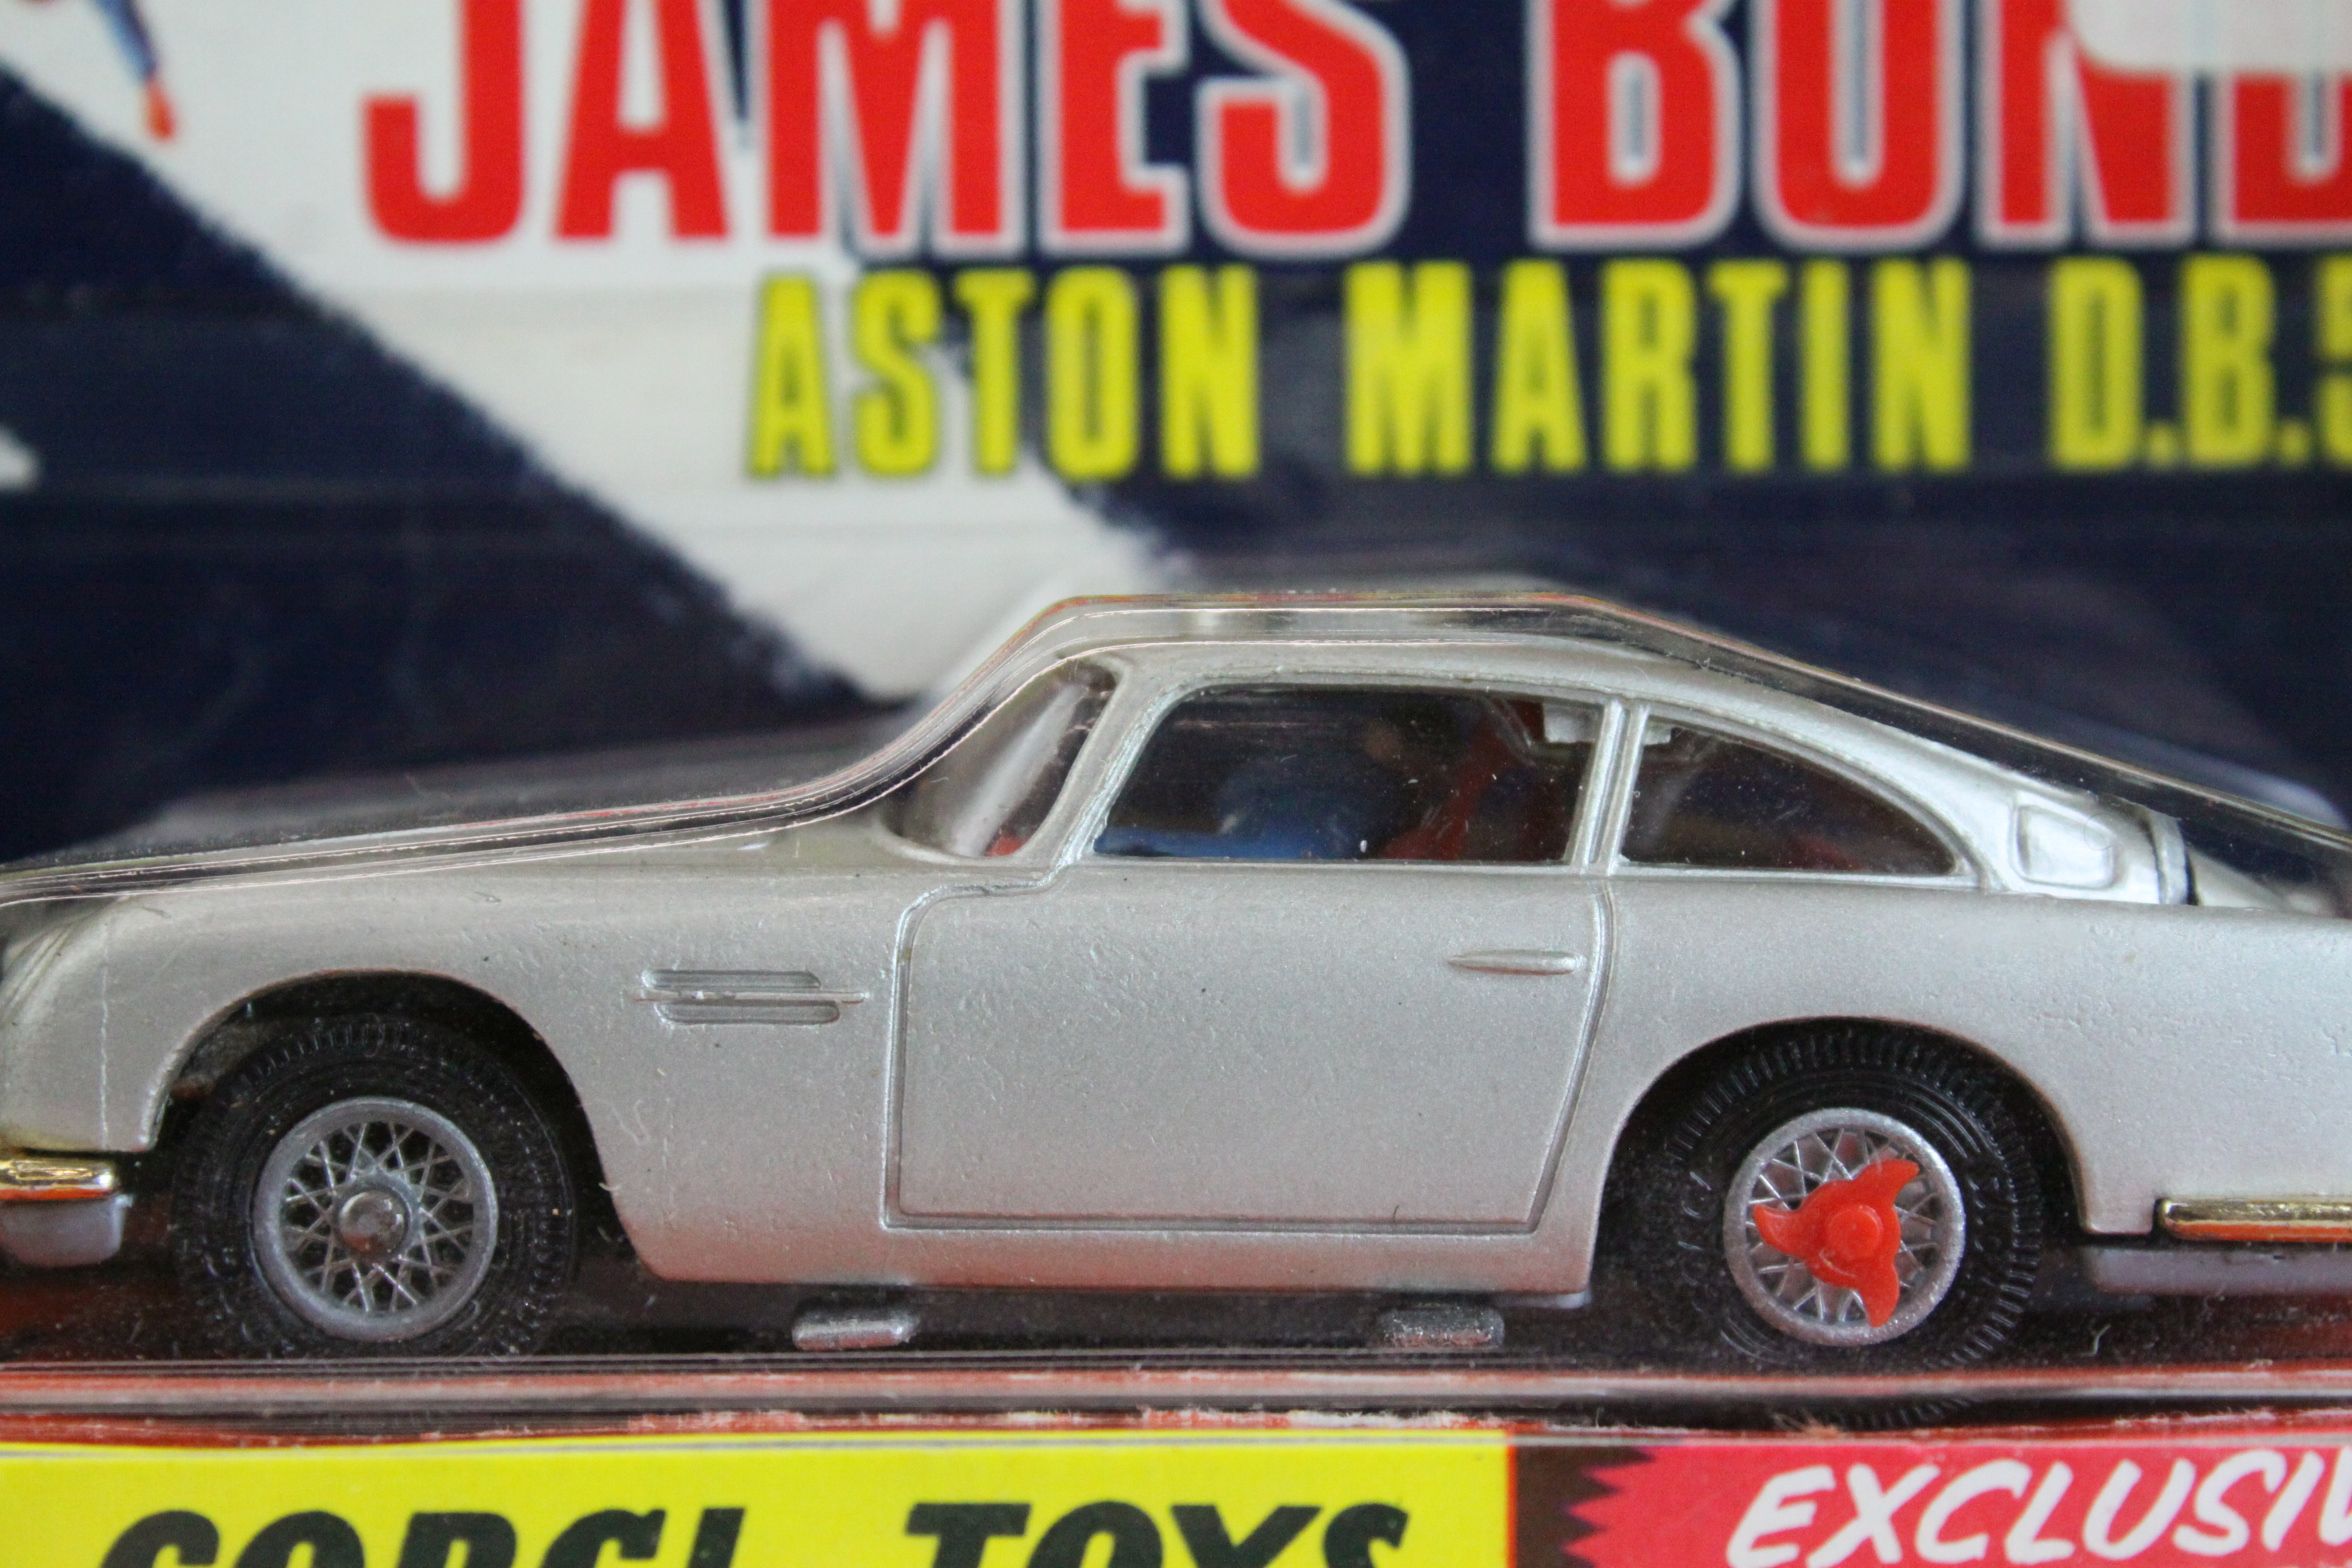 Boxed Corgi 270 The James Bond 007 Aston Martin diecast model appearing to be complete and unremoved - Image 8 of 9